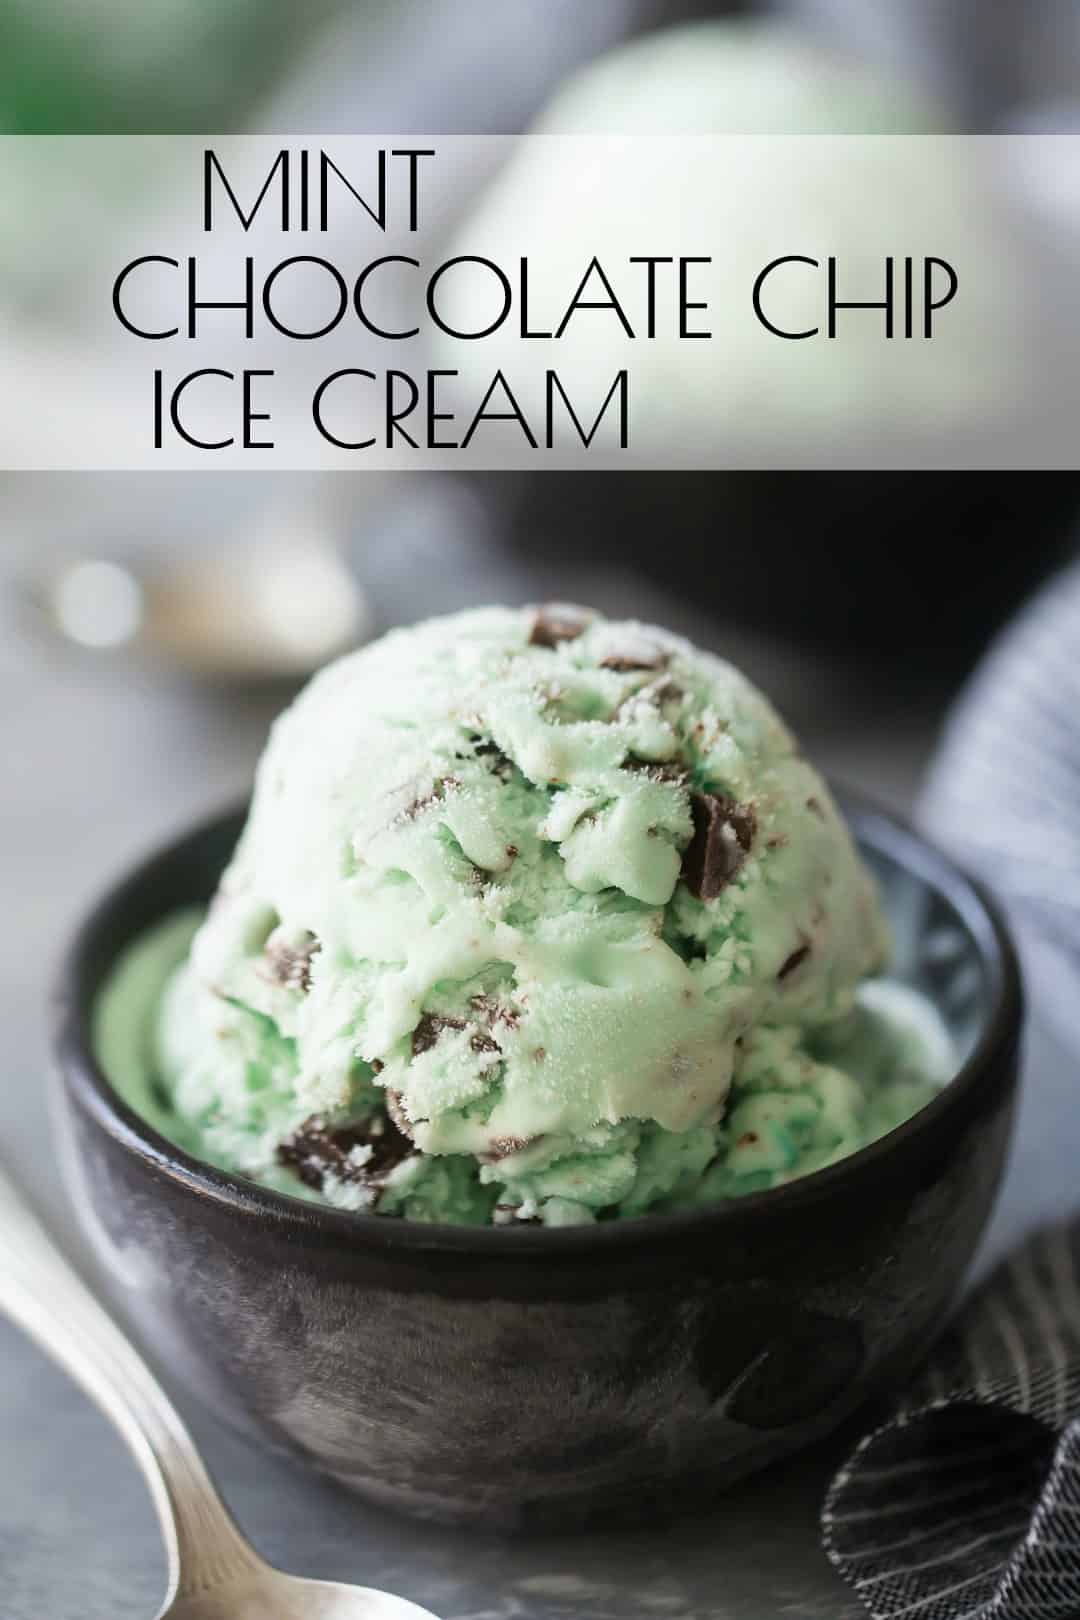 Two bowls of mint chocolate chip ice cream, with a text overlay above that reads "Mint Chocolate Chip Ice Cream."